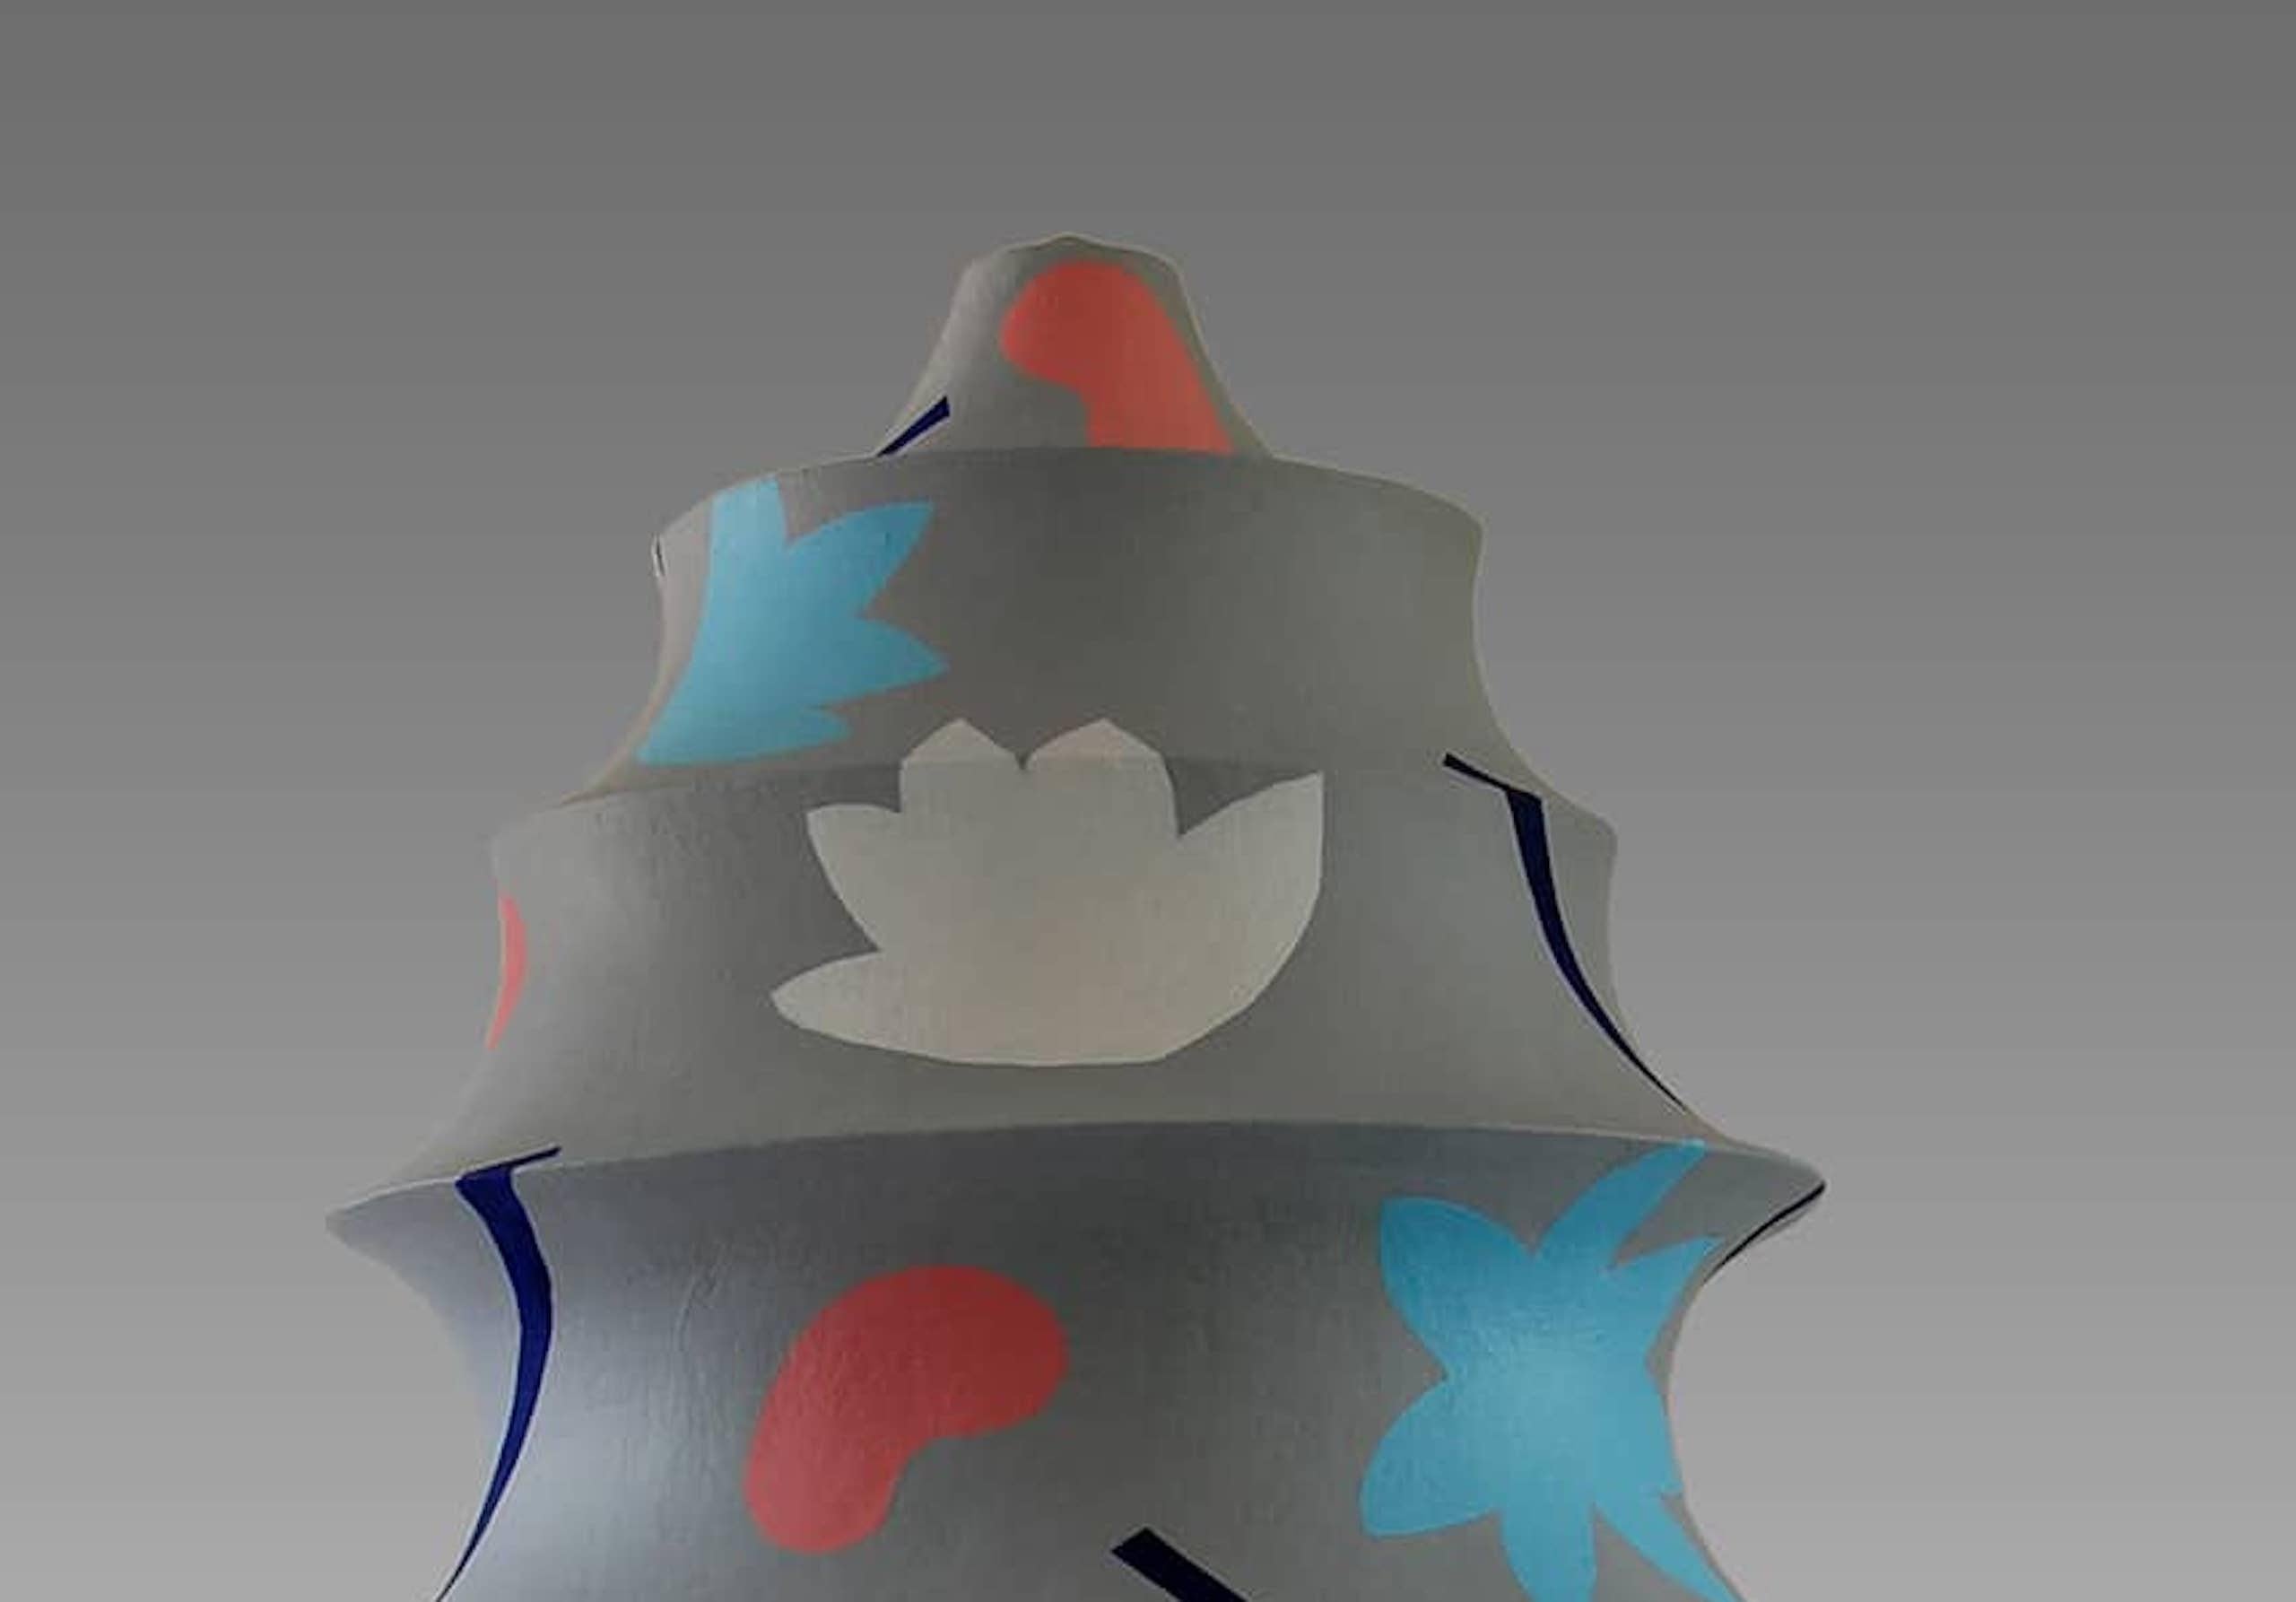 Twilight by Patricia Volk - Abstract ceramic sculpture, painted clay, flowers For Sale 3